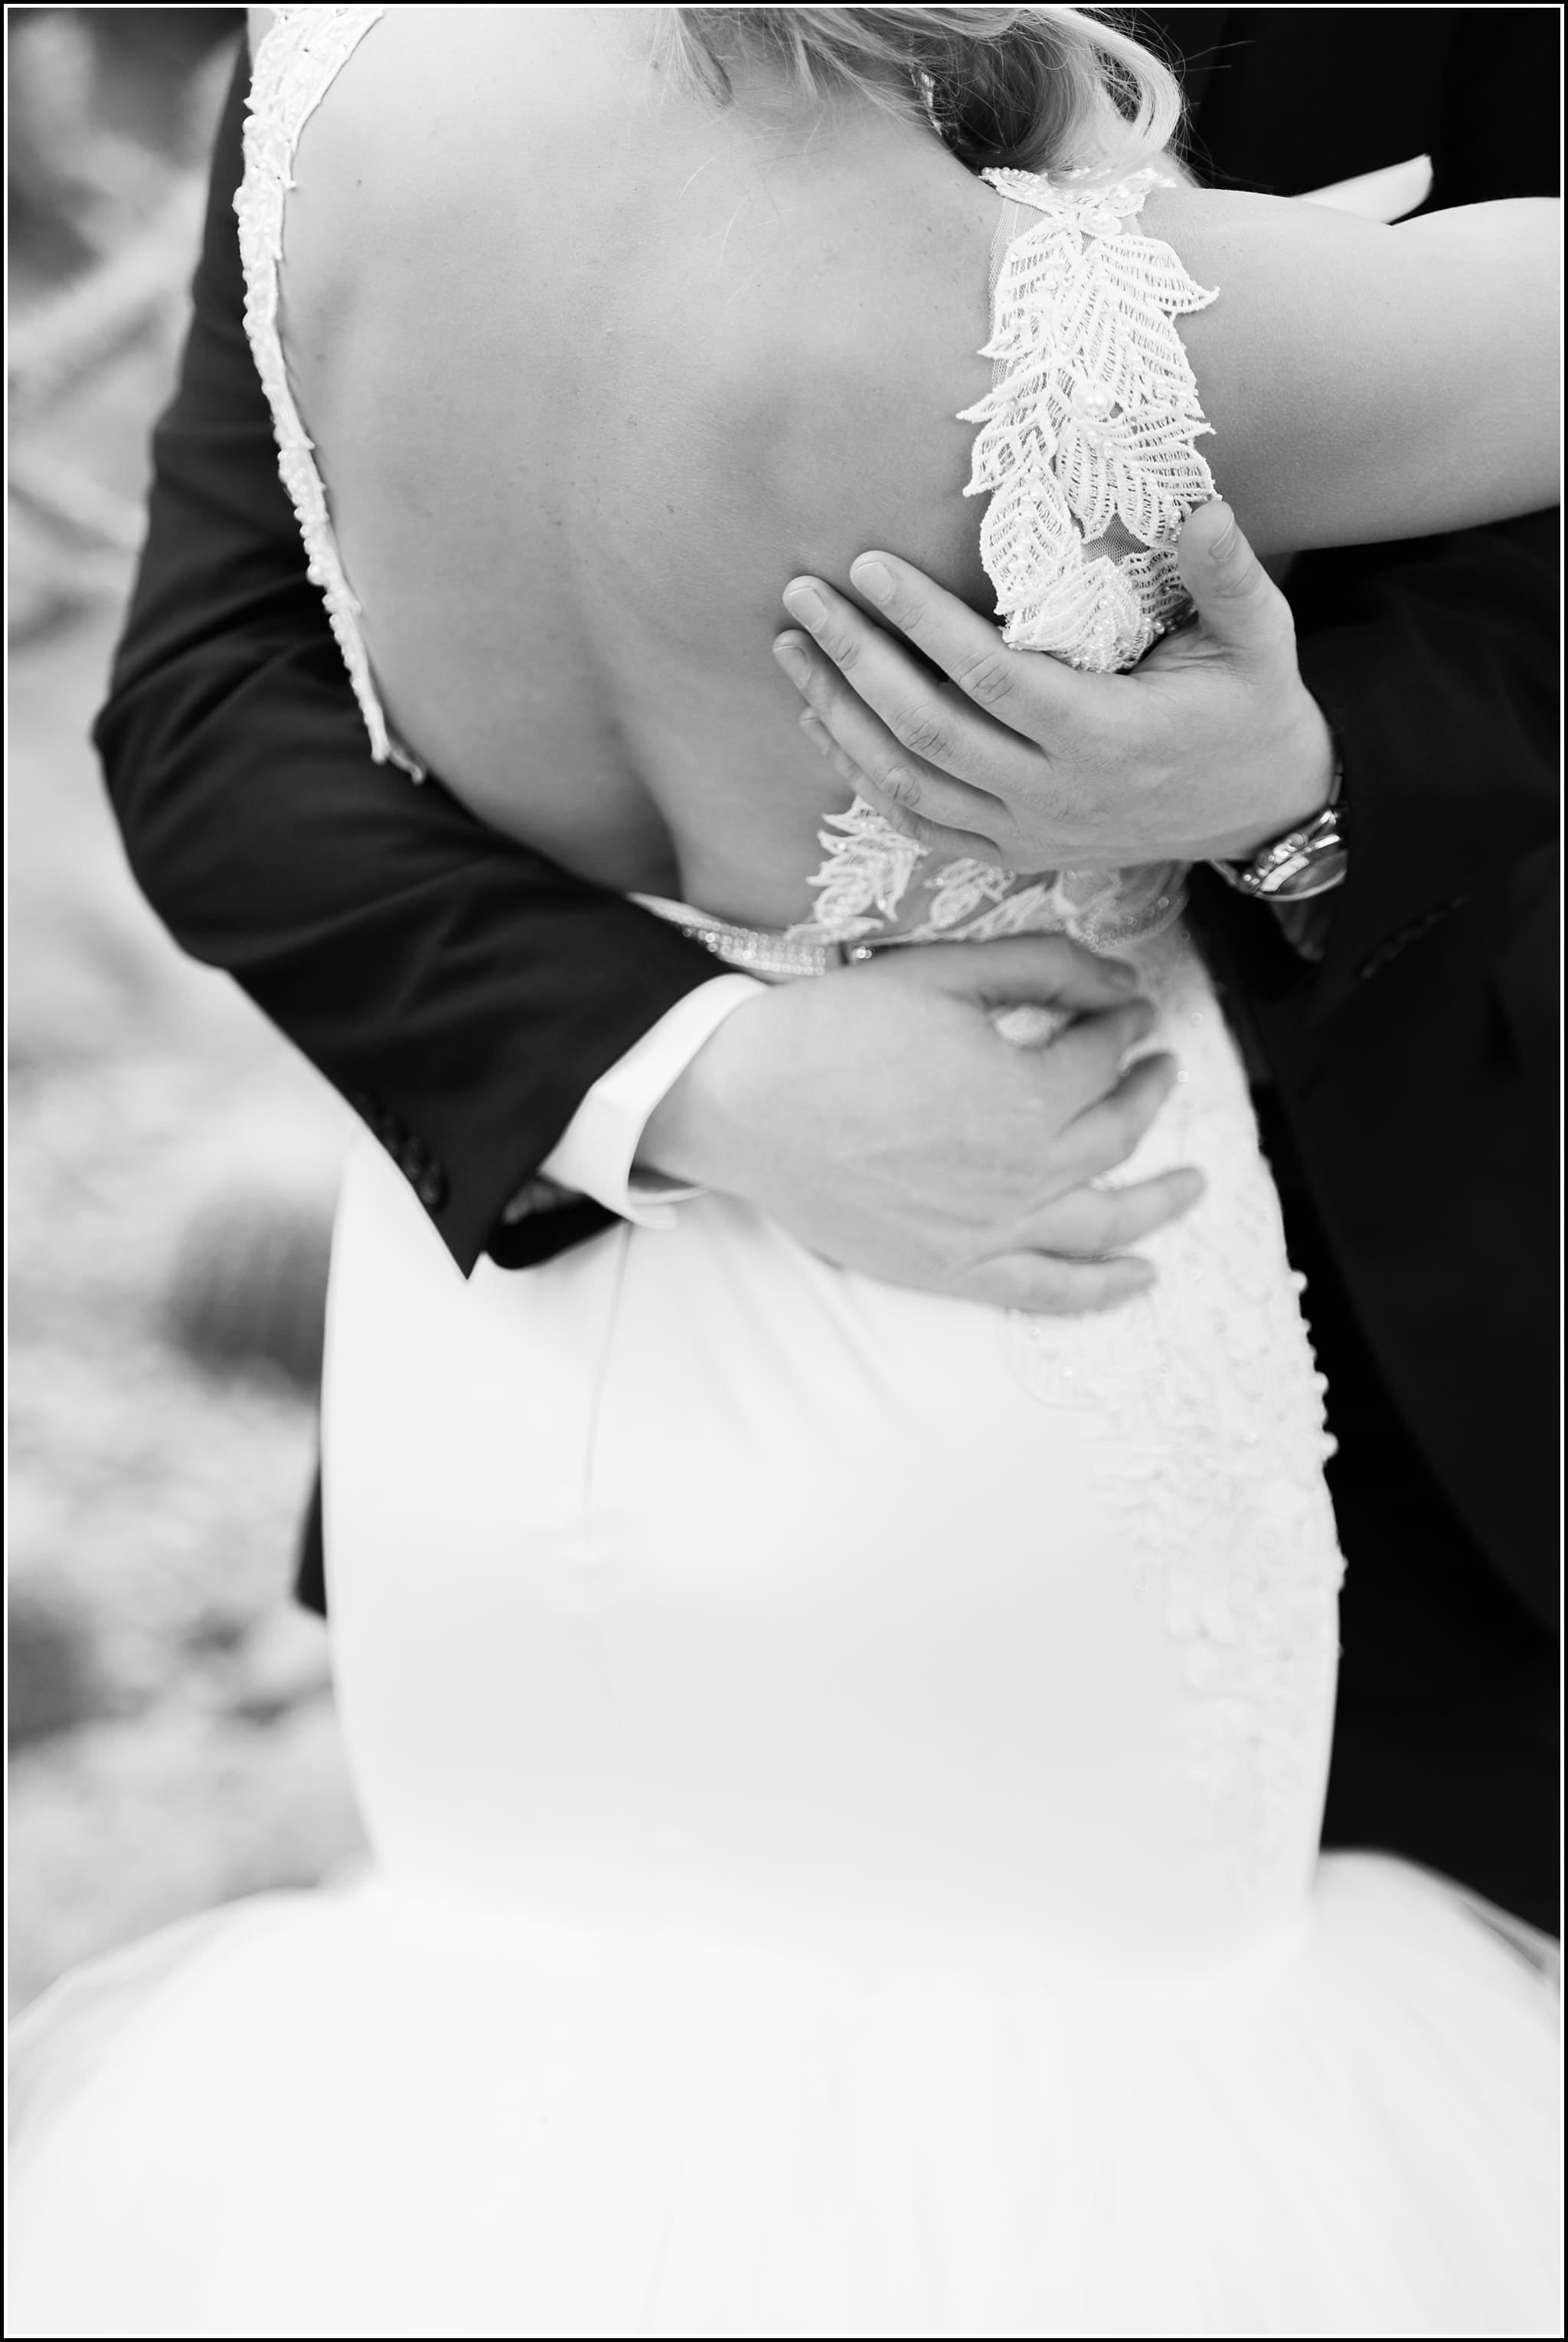  favorite wedding images 2016, wedding photos from 2016, our favorite wedding photos, black and white wedding details, backless wedding gown